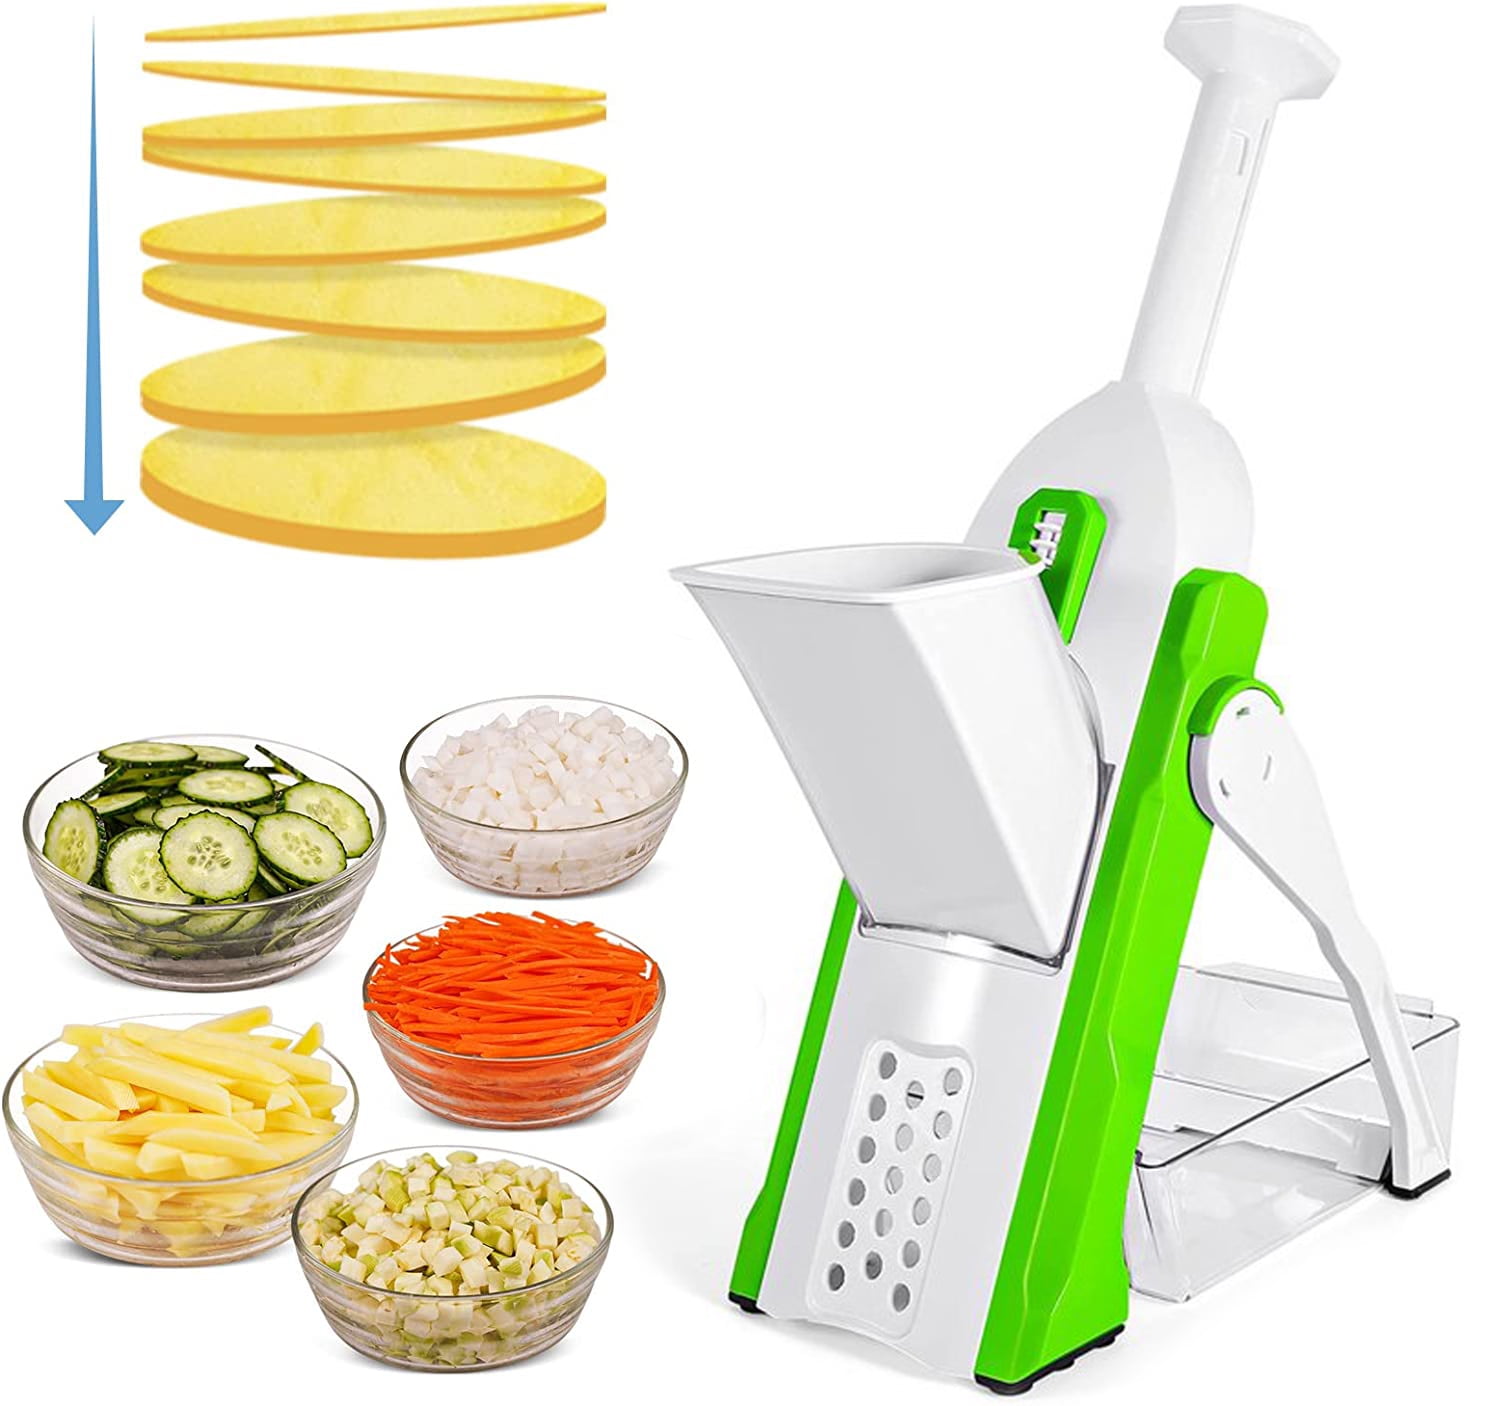  ONCE FOR ALL Safe Mandoline Slicer 5 in 1 Vegetable Chopper  Food Potato Cutter, Strips Julienne Dicer Adjustable Thickness 0.1-8 mm  Kitchen Chopping Artifact Fast Meal Prep (Gray) : Home & Kitchen